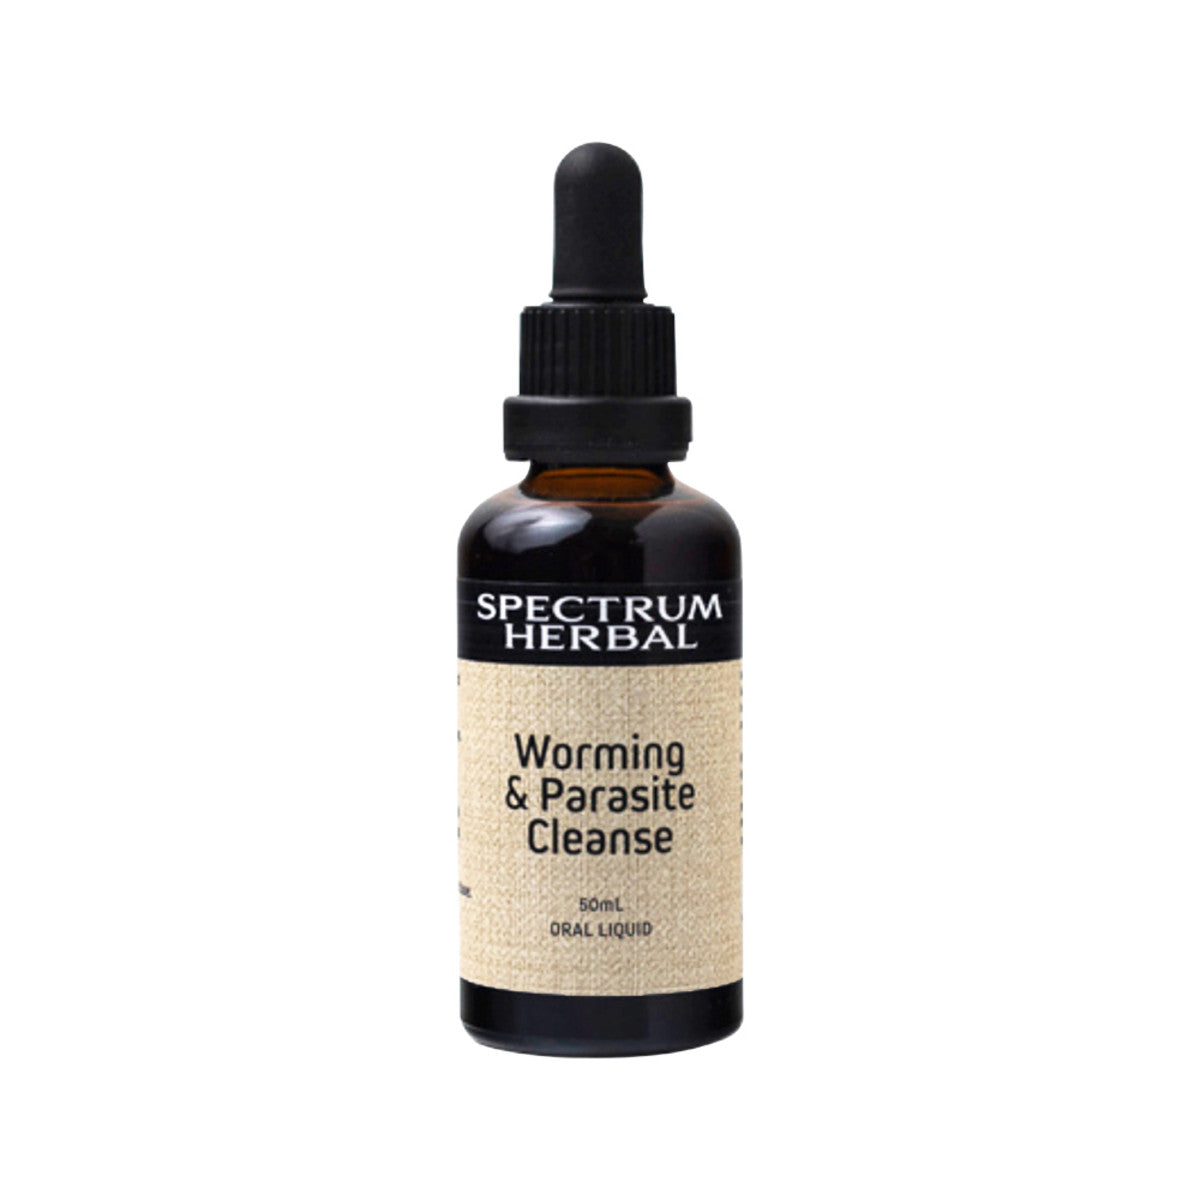 Spectrum Herbal Worming and Parasite Cleanse 50ml